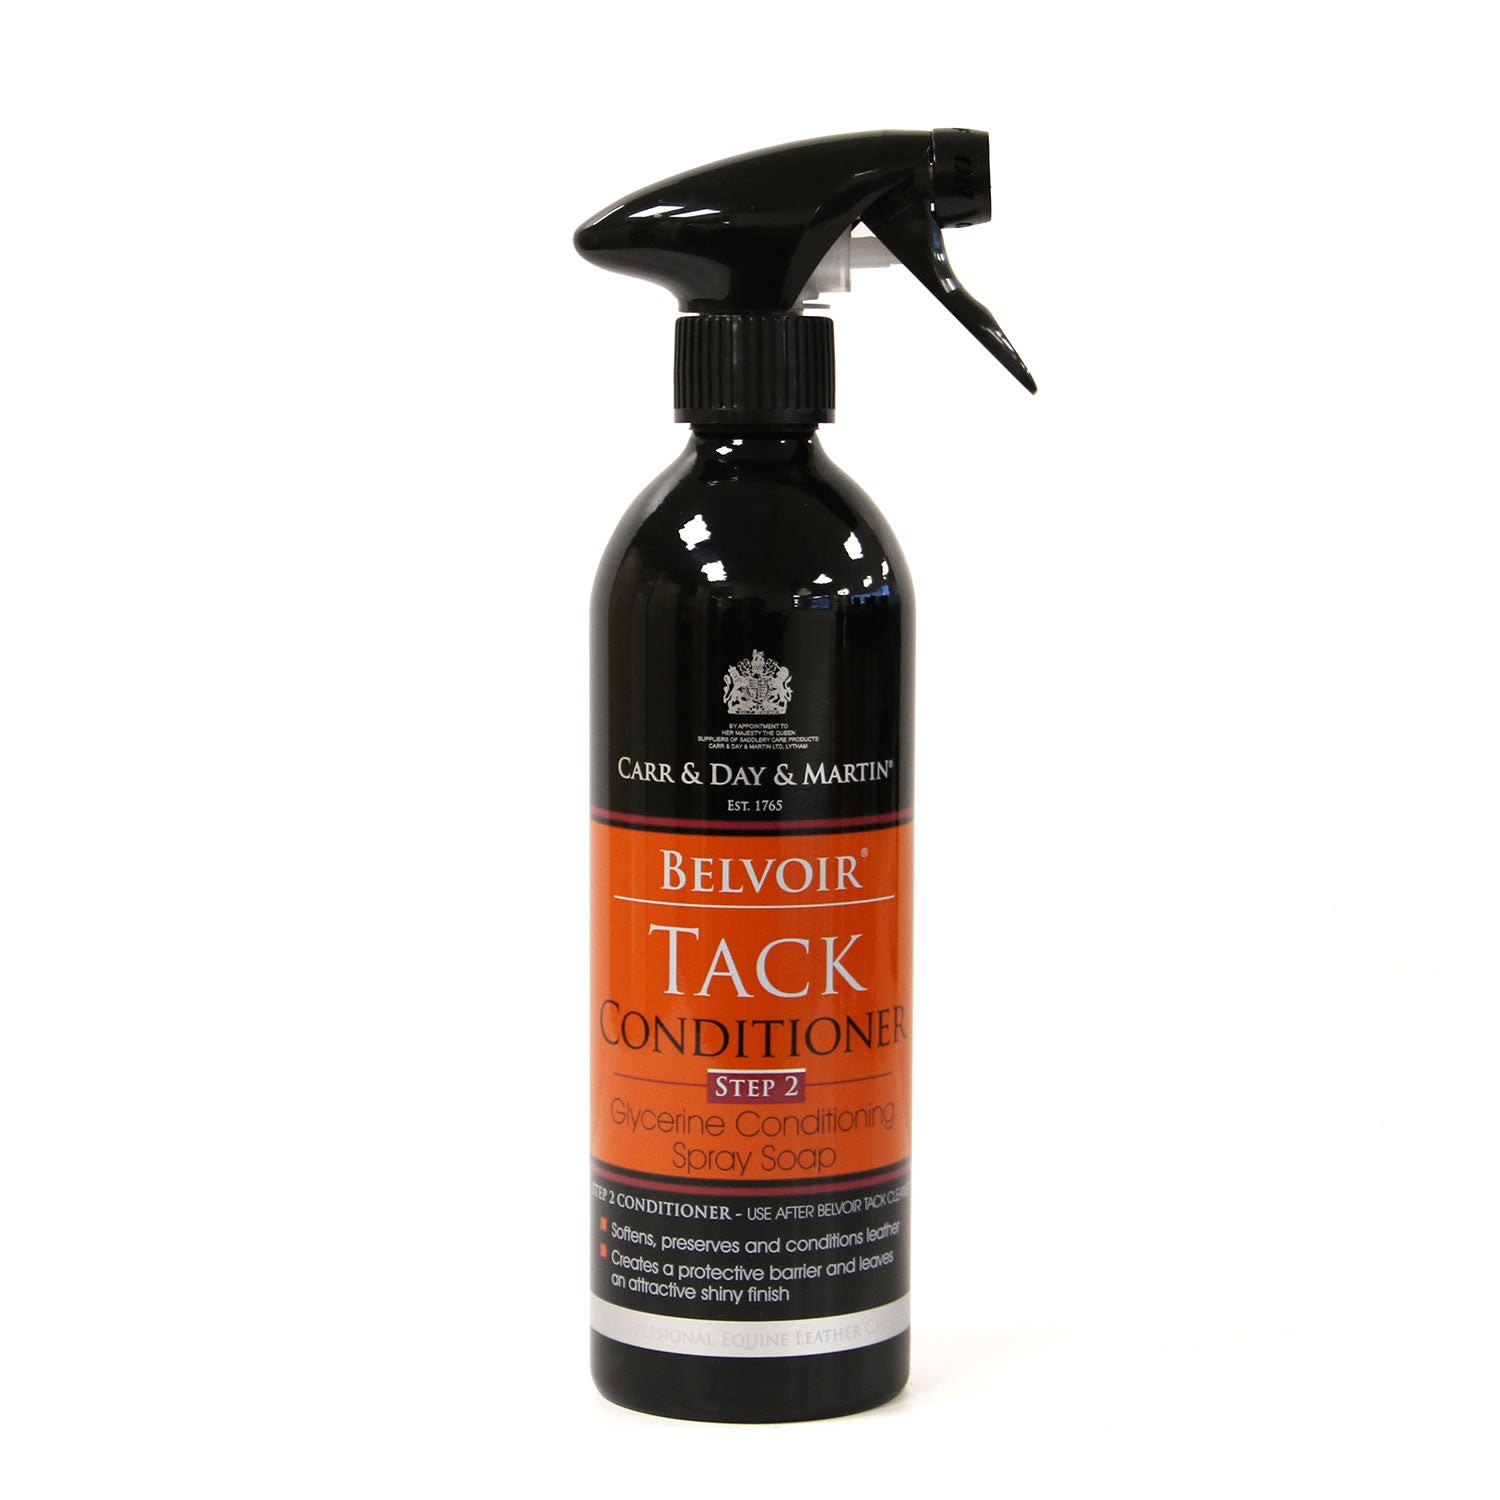 Carr & Day & Martin Belvoir Tack Conditioner Step 2 500ml